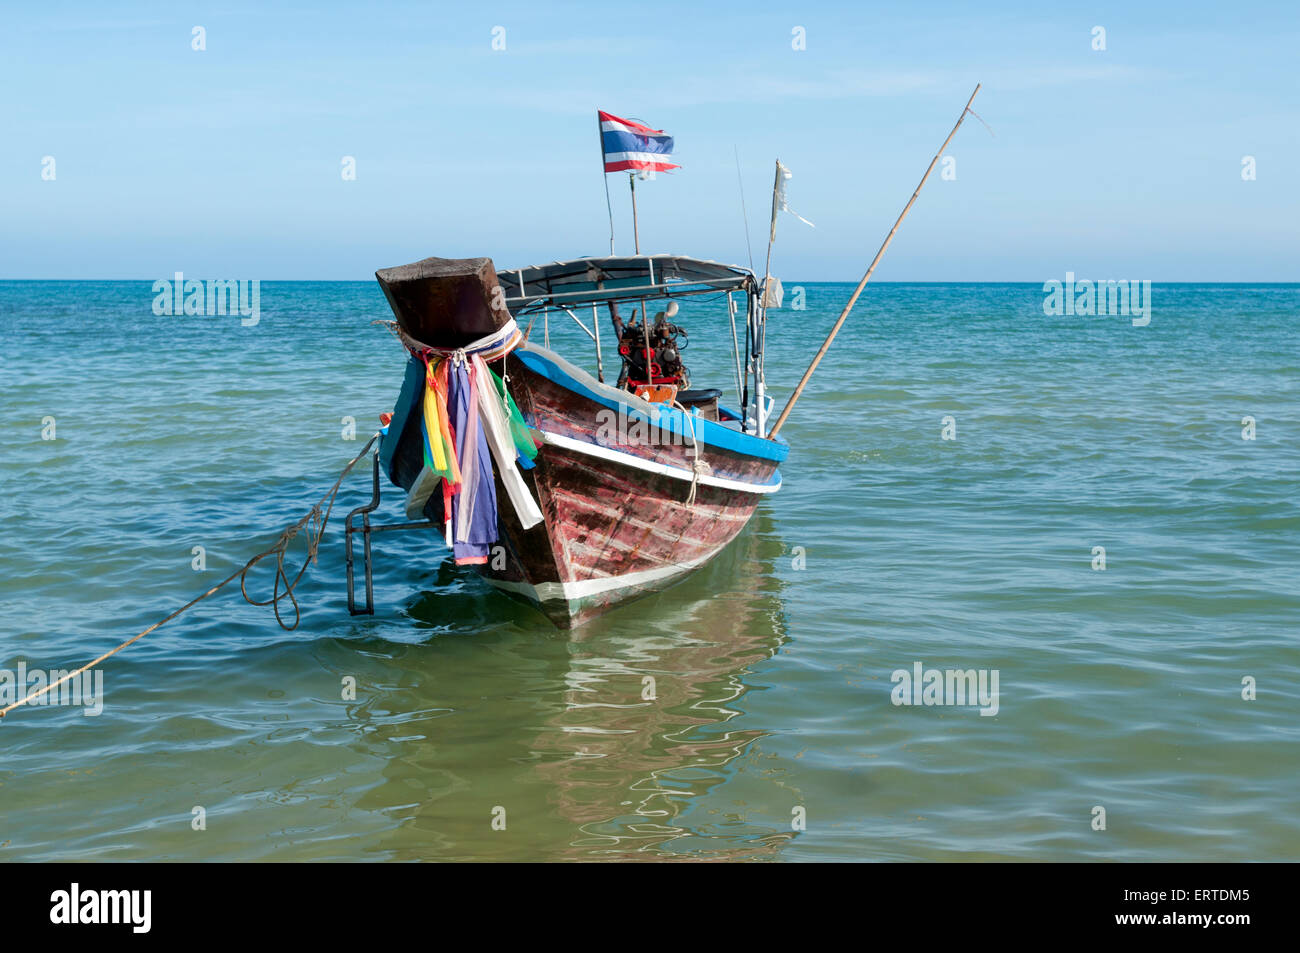 Bow view of a long tail Thai fishing boat moored in the shallows on a beach on Koh Samui island Thailand Stock Photo